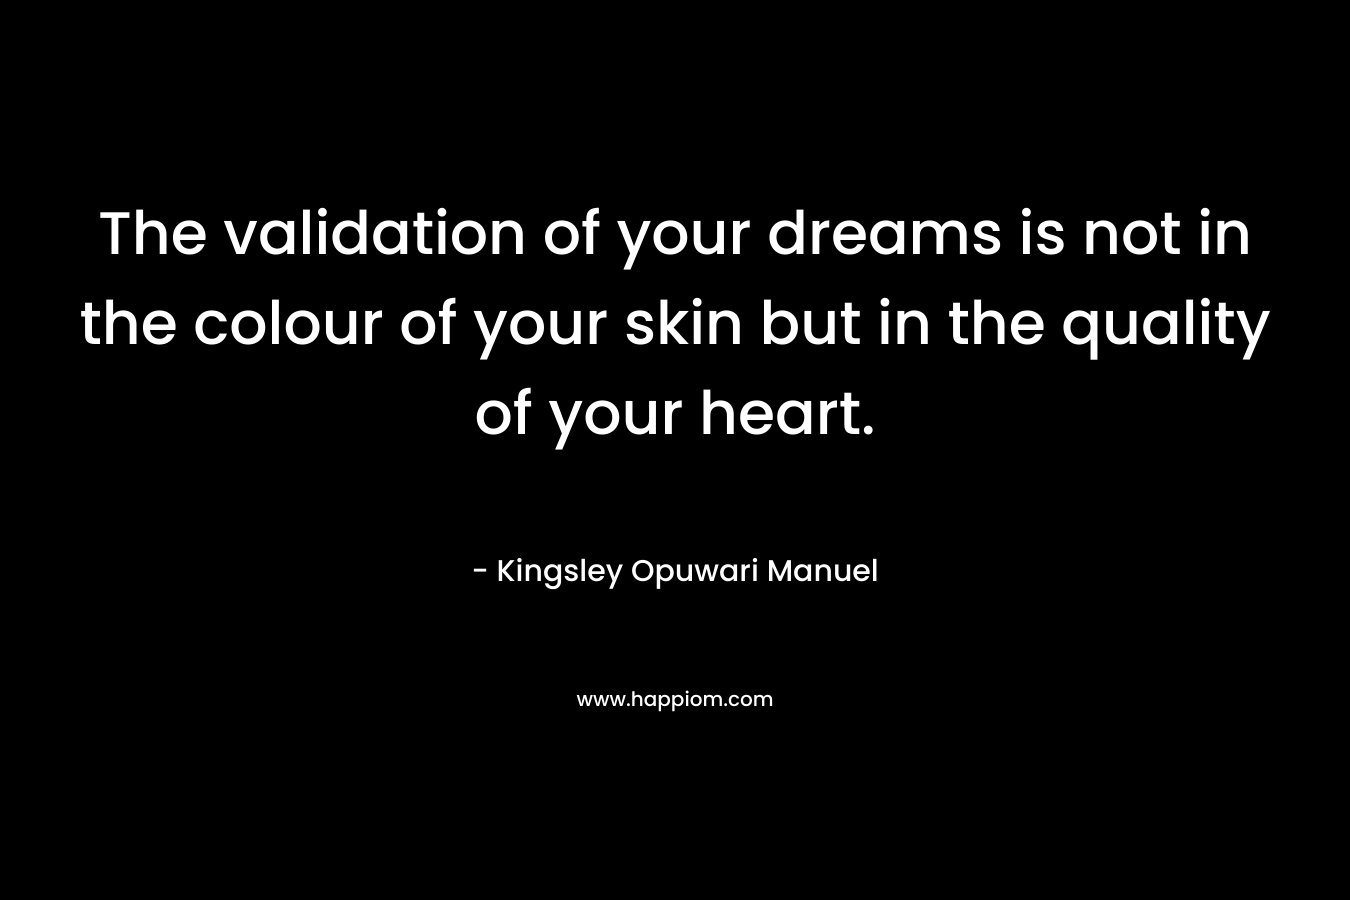 The validation of your dreams is not in the colour of your skin but in the quality of your heart. – Kingsley Opuwari Manuel